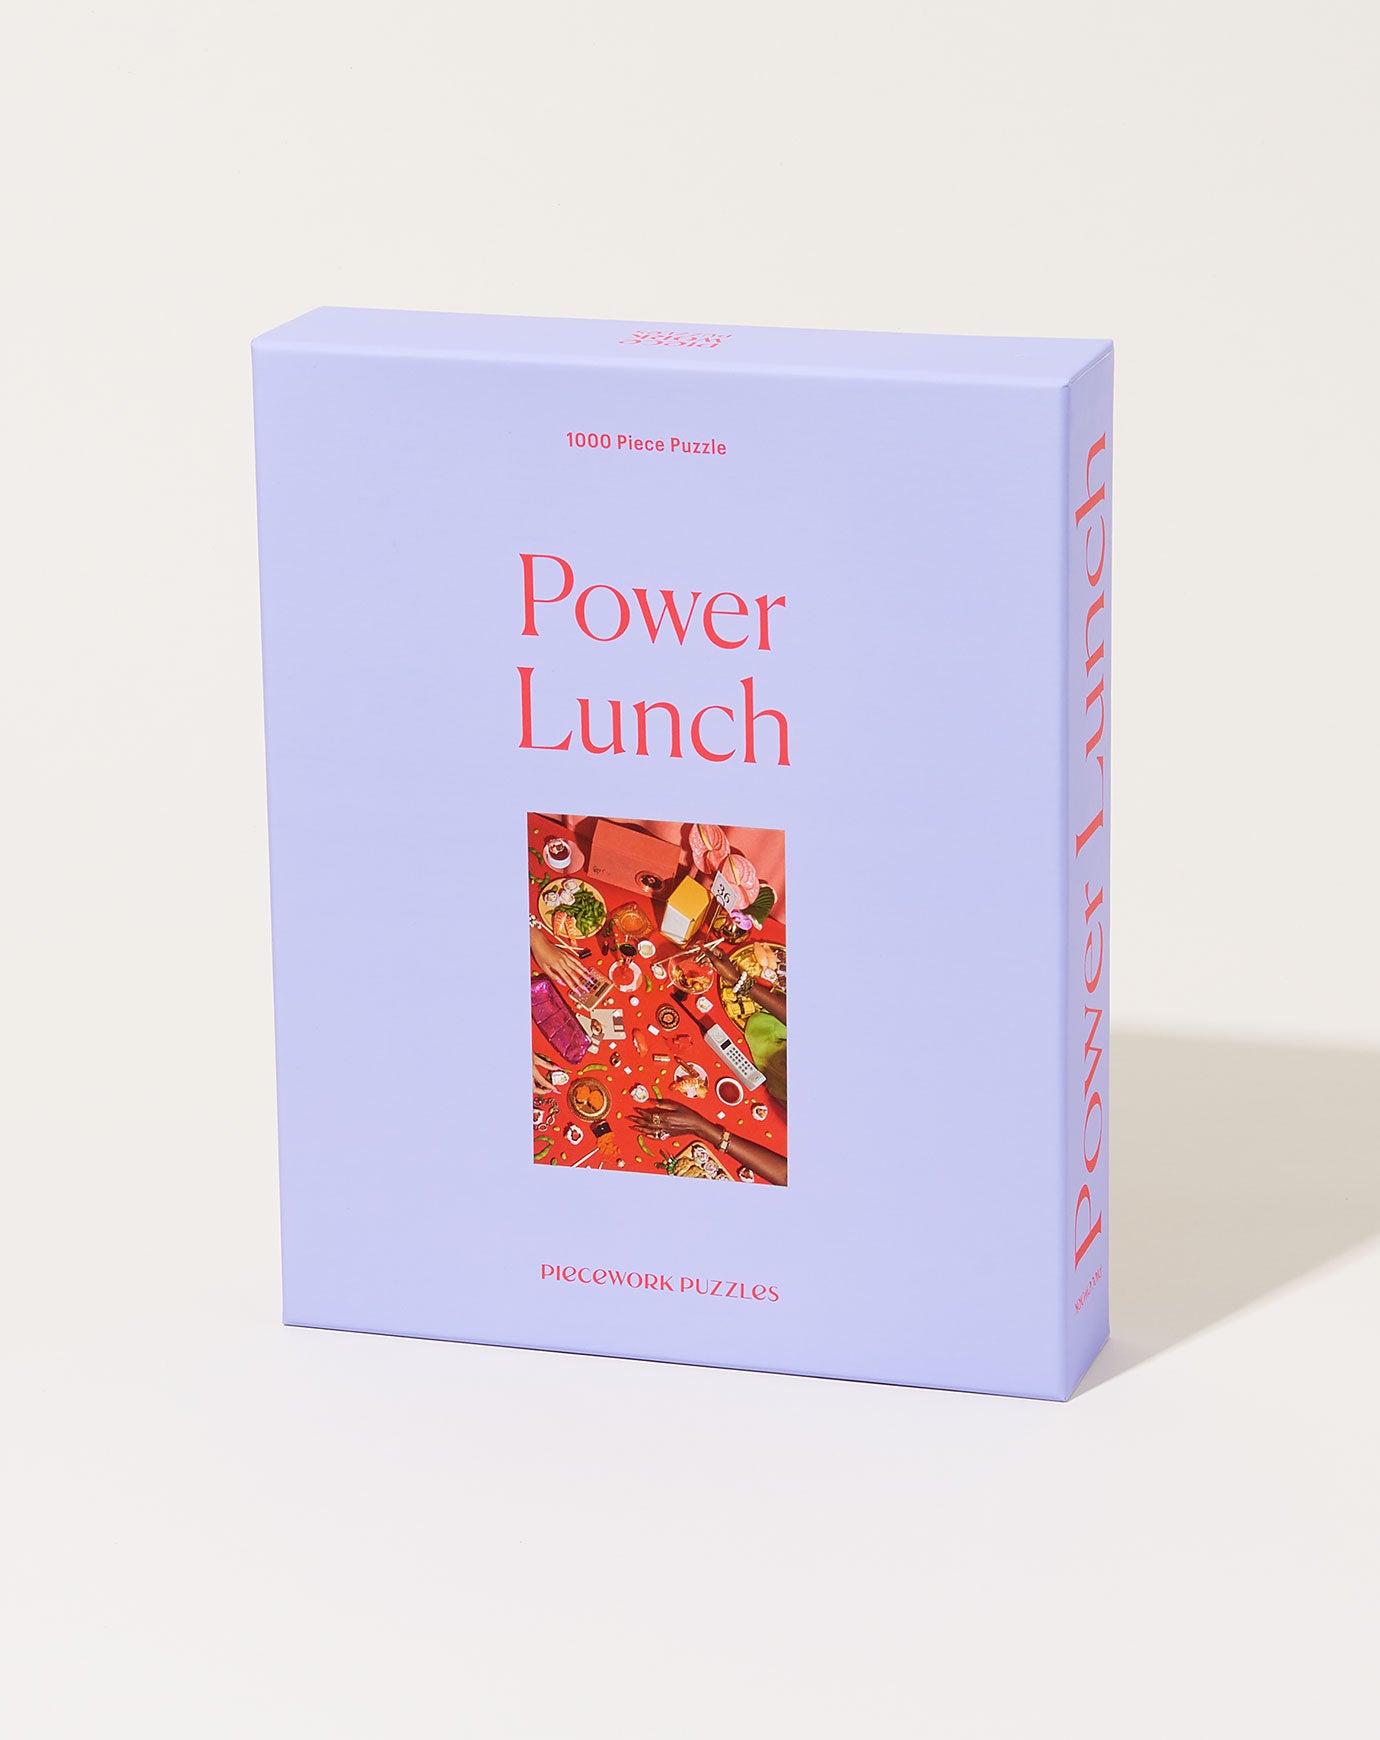 Piecework Puzzles Power Lunch 1000 Piece Puzzle